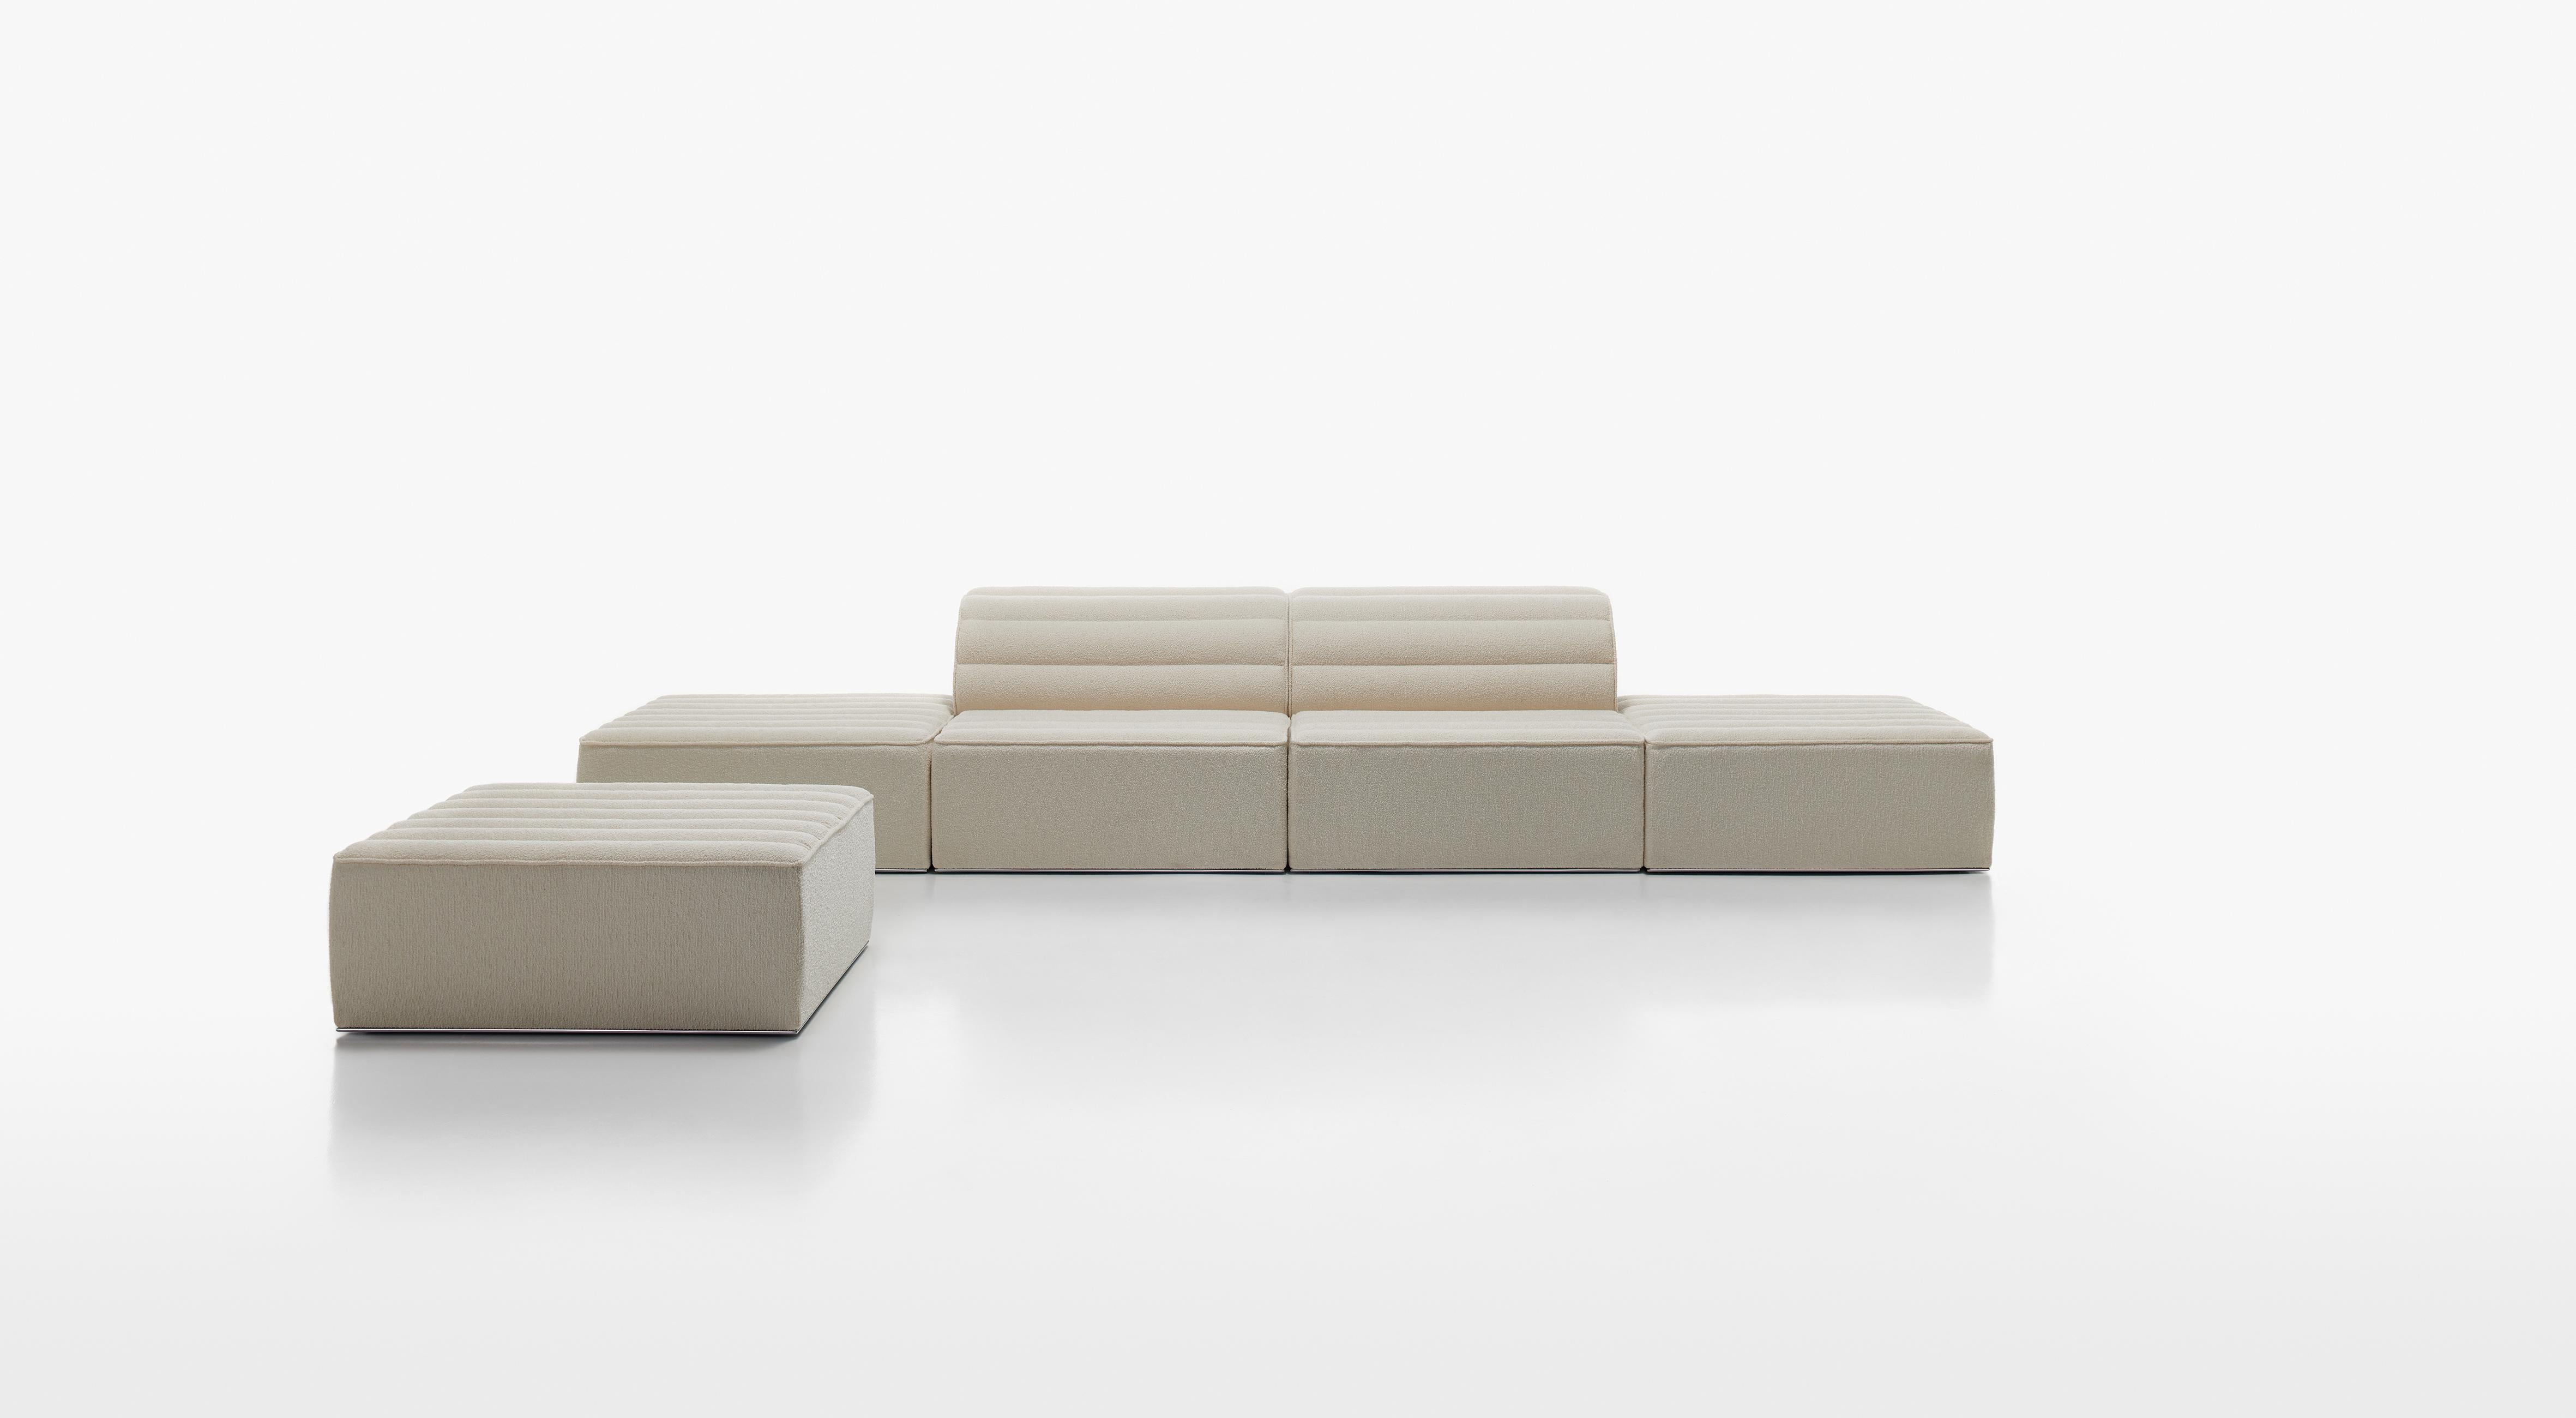 In 1973, Claudio Salocchi designed Free System: a system of padded furniture deriving from the concept of “operated flooring”, or tatami, where the padded units could be placed freely side by side. With its completely modular and sectional